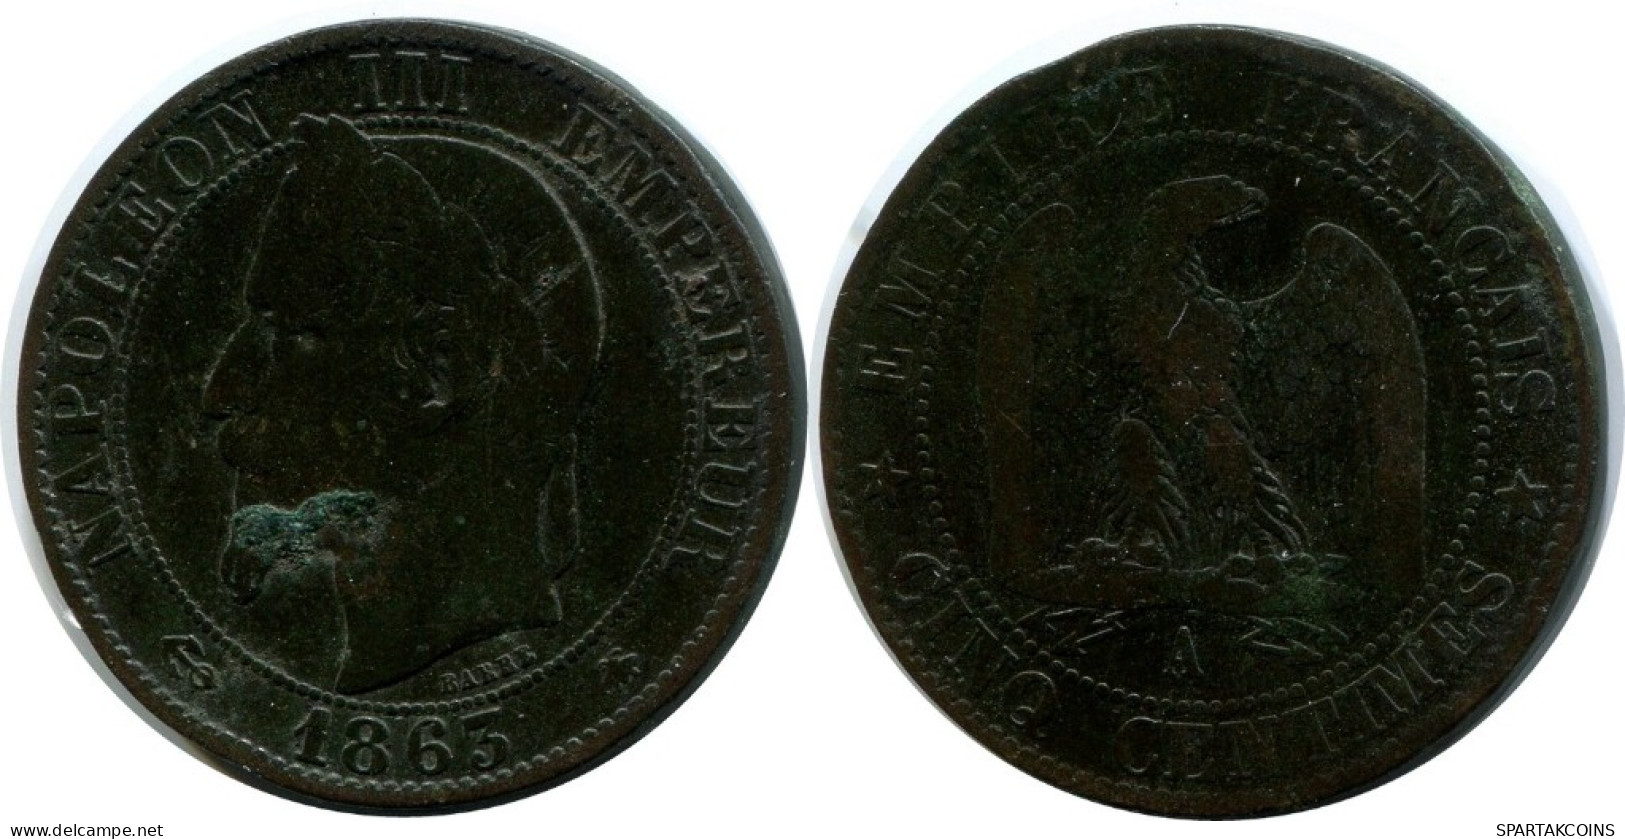 5 CENTIMES 1865 A FRANCE French Coin #AM952.U.A - 5 Centimes